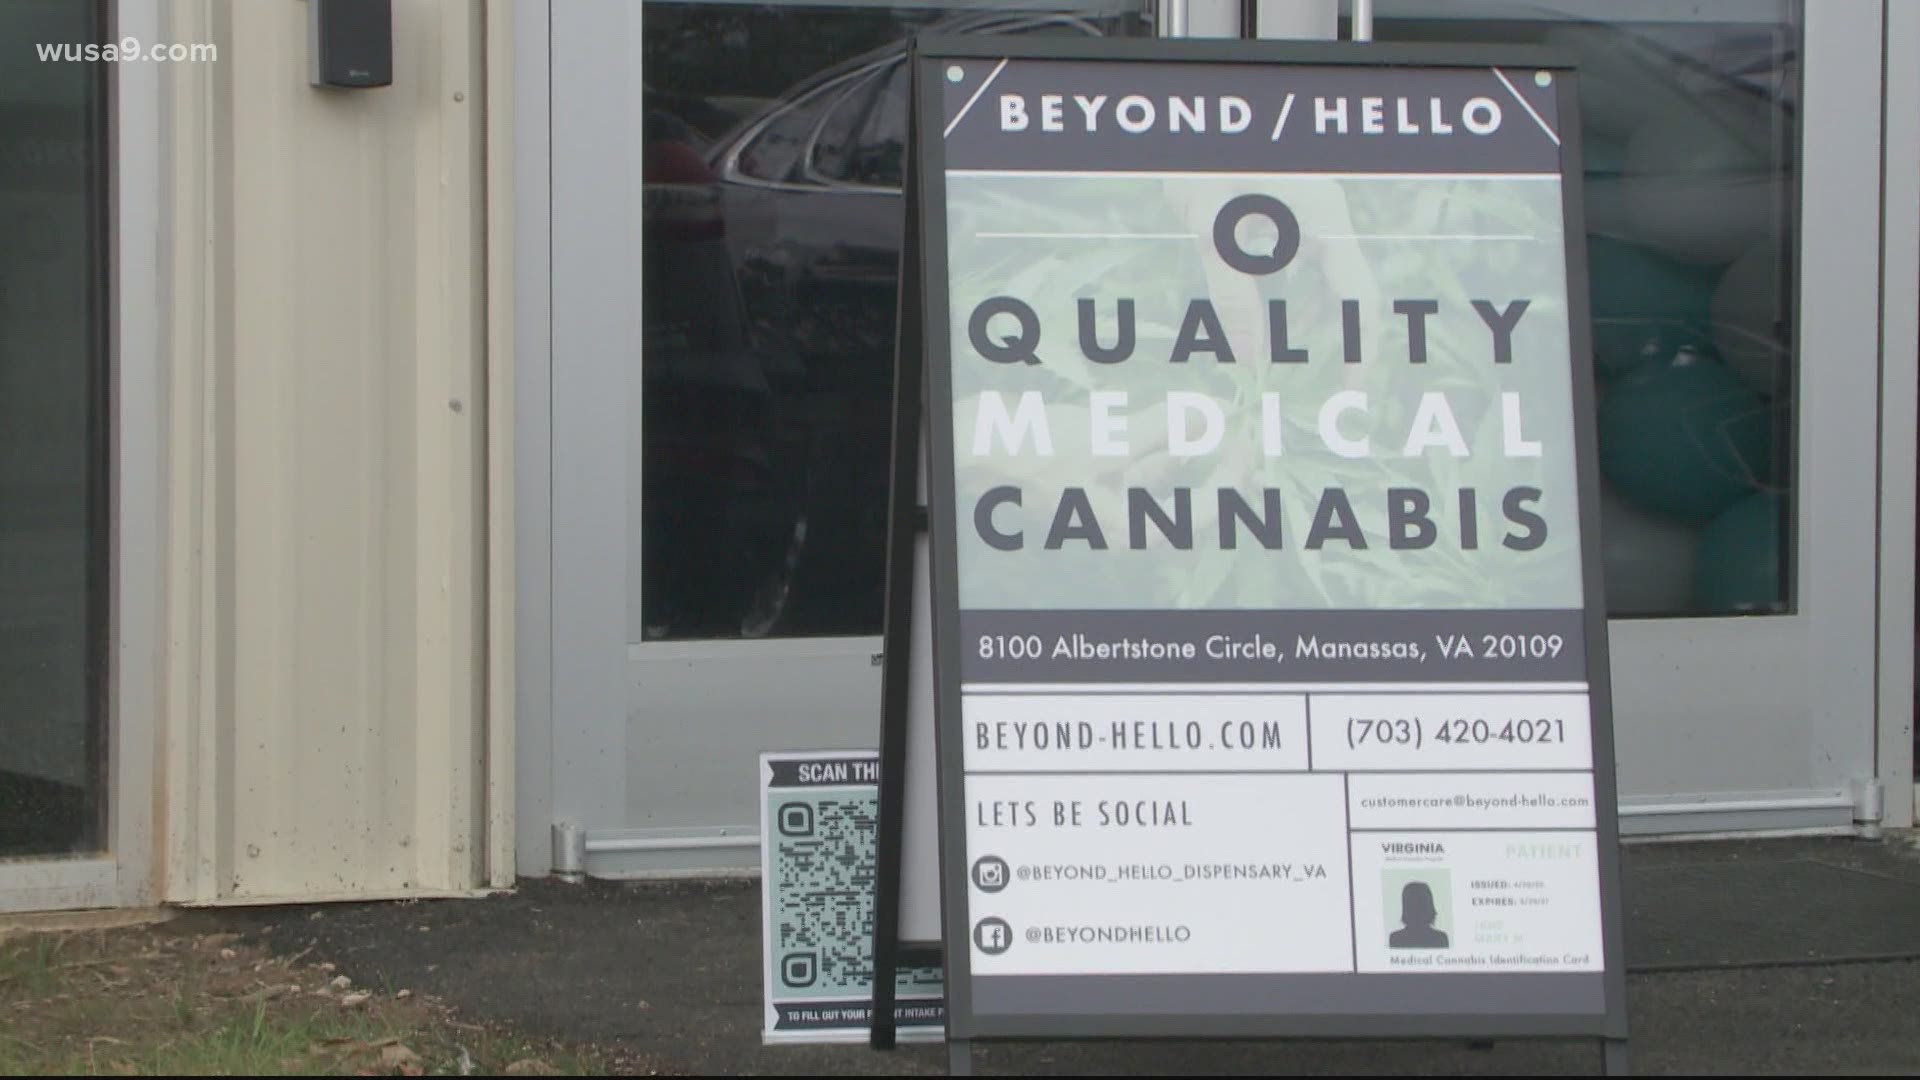 Any registered patient in Virginia can visit Beyond / Hello to purchase their cannabis medicine, officials say.